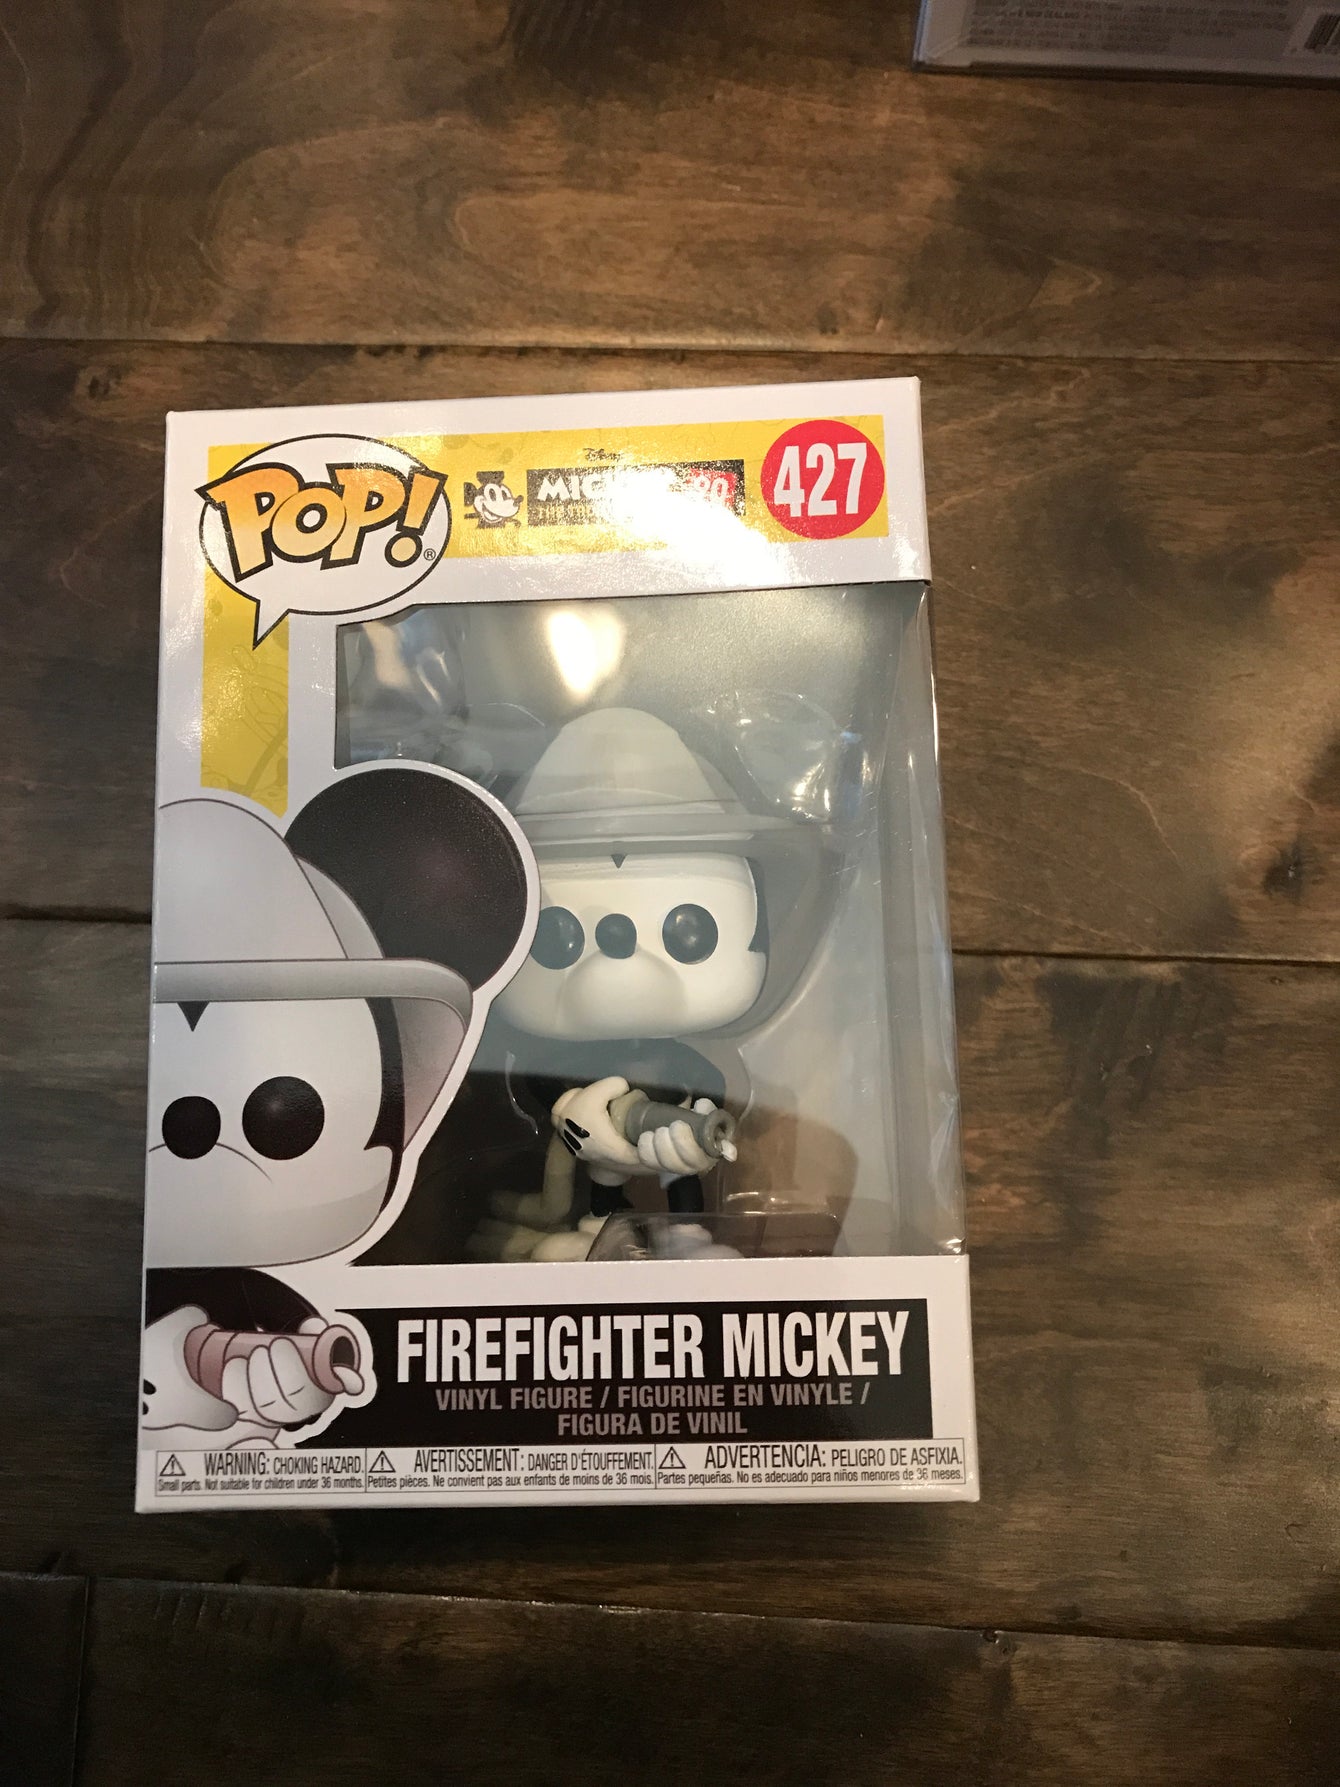 Firefighter Mickey mint condition. LC4